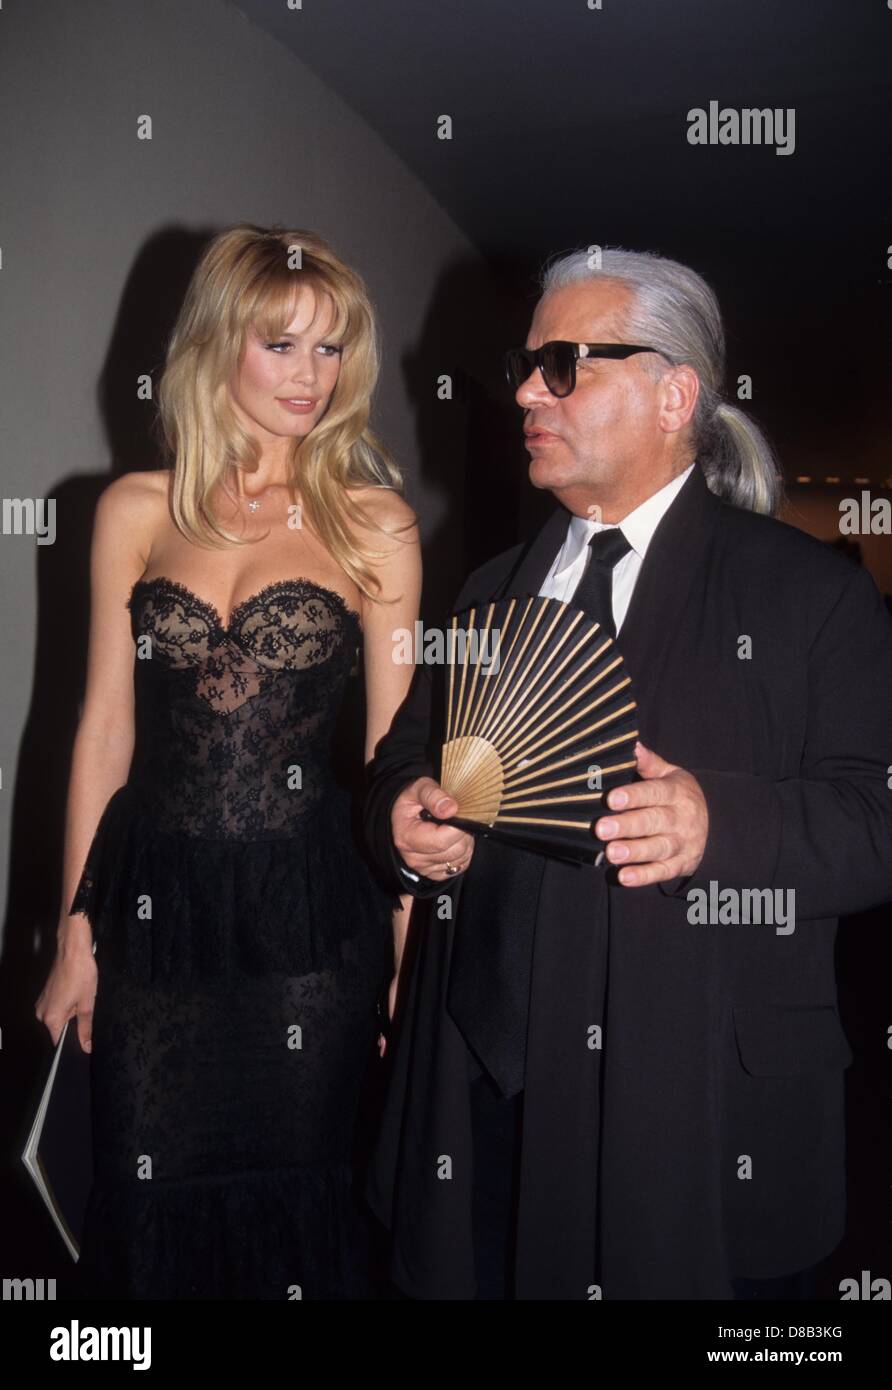 KARL LAGERFELD with Claudia Schiffer at the 14th annual CFDA awards 1995.30304.(Credit Image: © Sonia Moskowitz/Globe Photos/ZUMAPRESS.com) Stock Photo